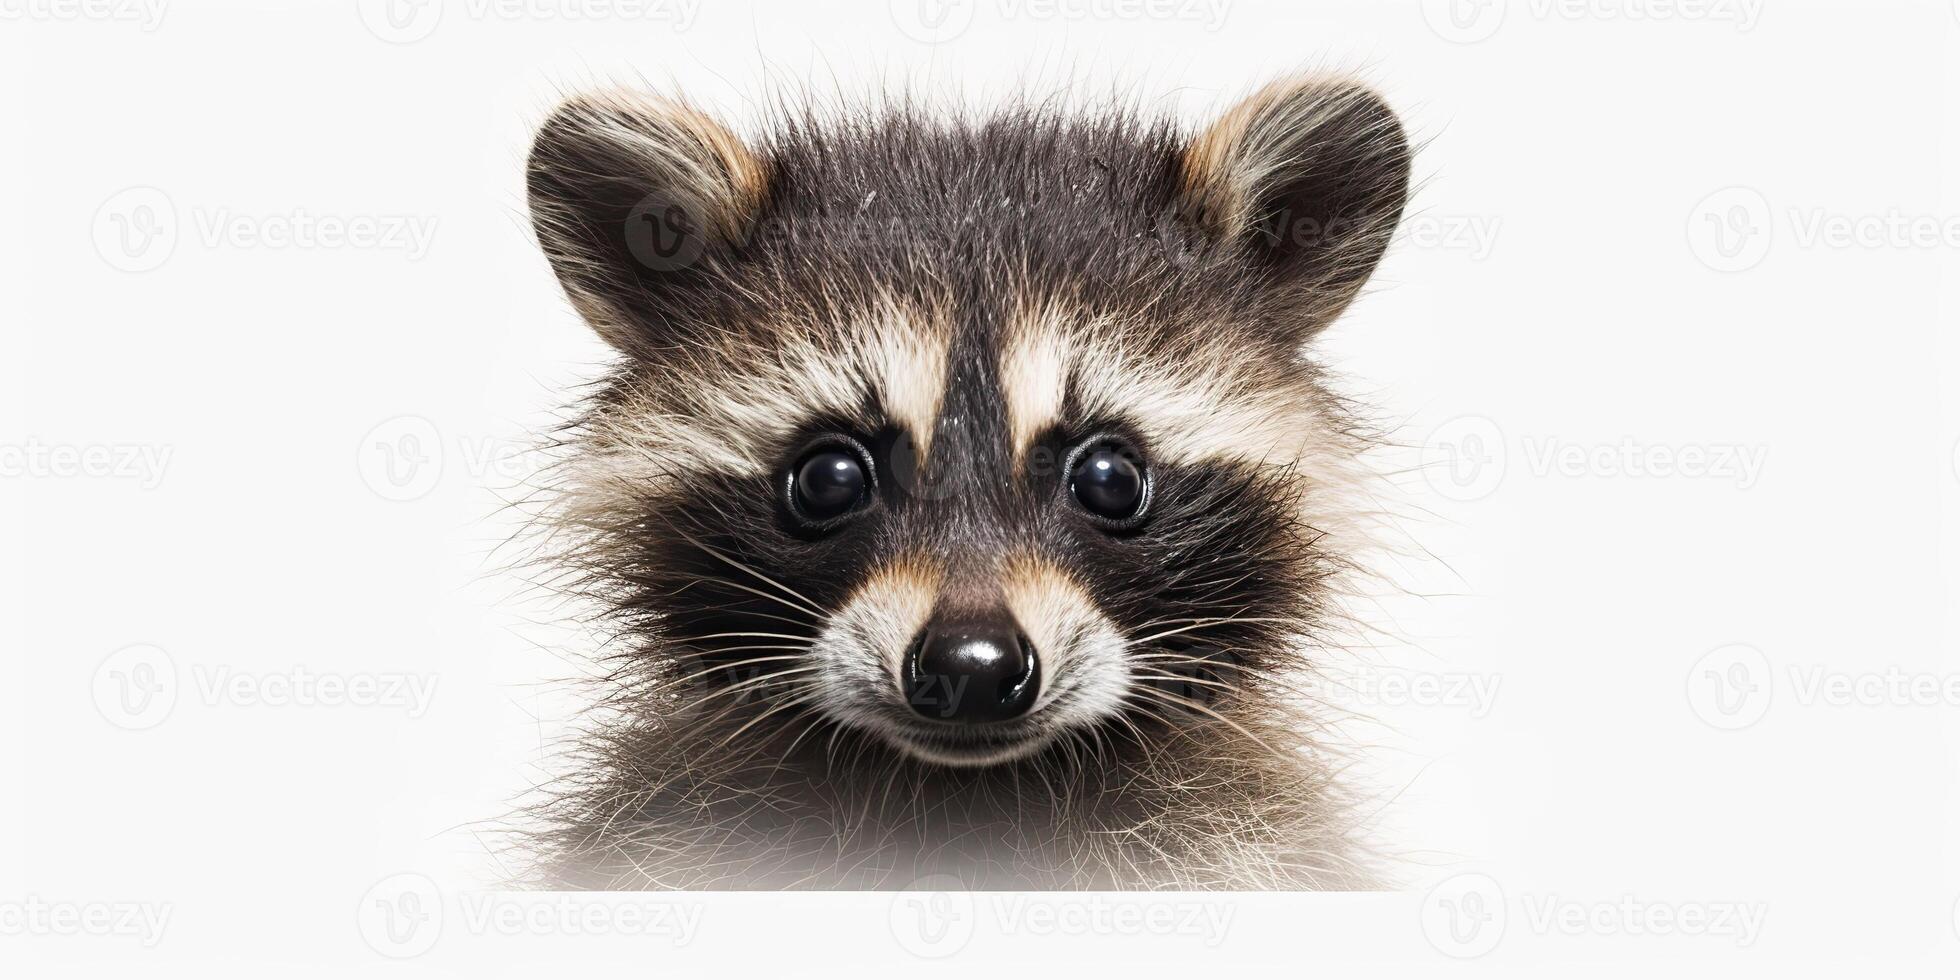 . . Photo Illustration of baby little nimal racoon face portrait cure. Graphic Art